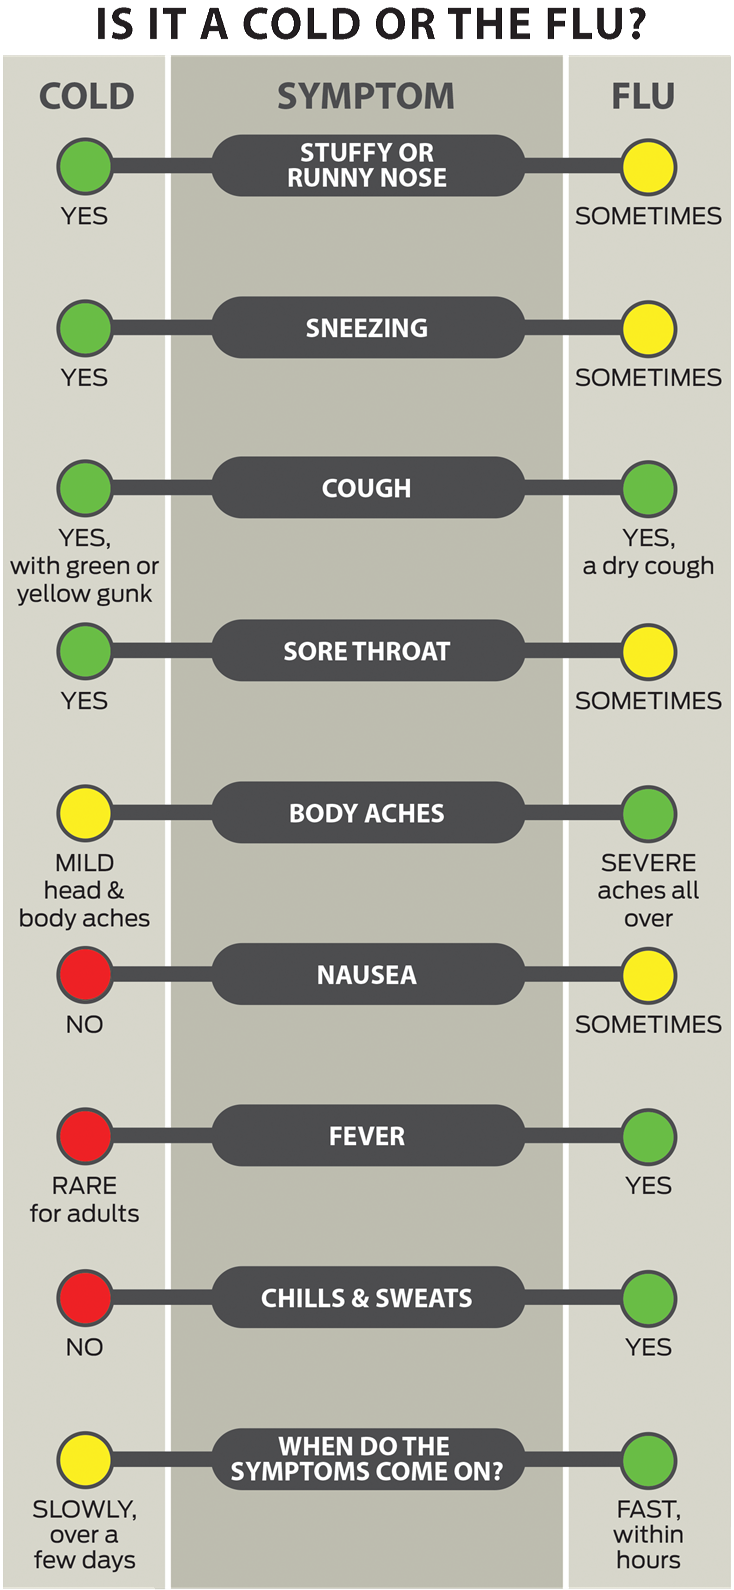 Flu or Cold